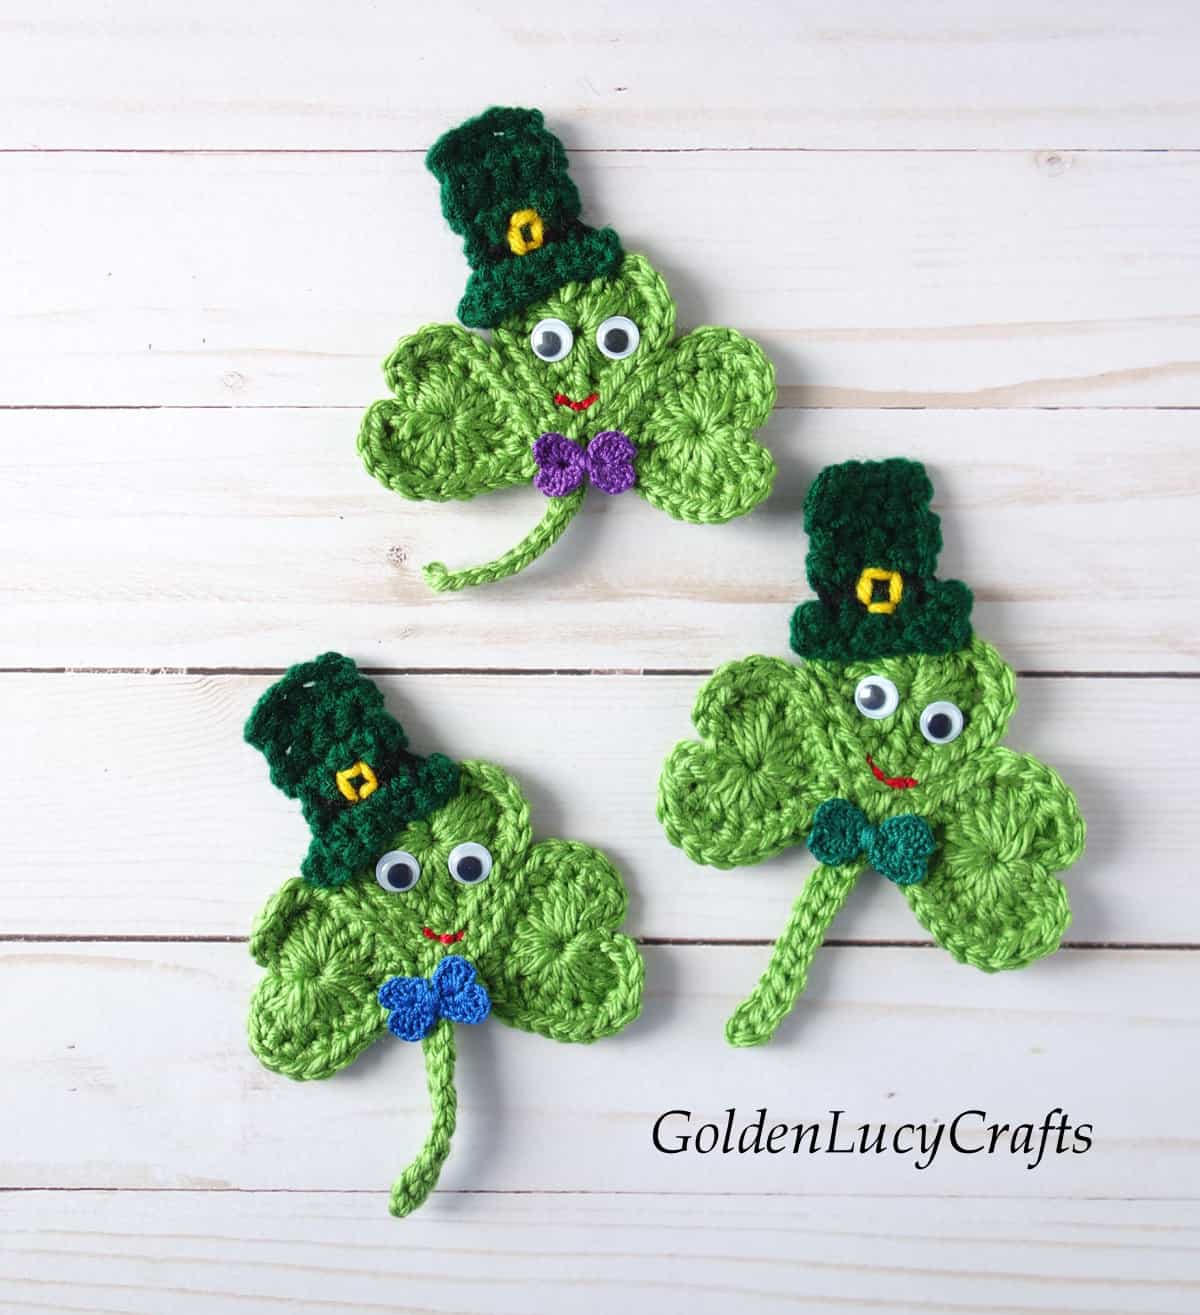 Three crocheted shamrocks in hats and with googly eyes.